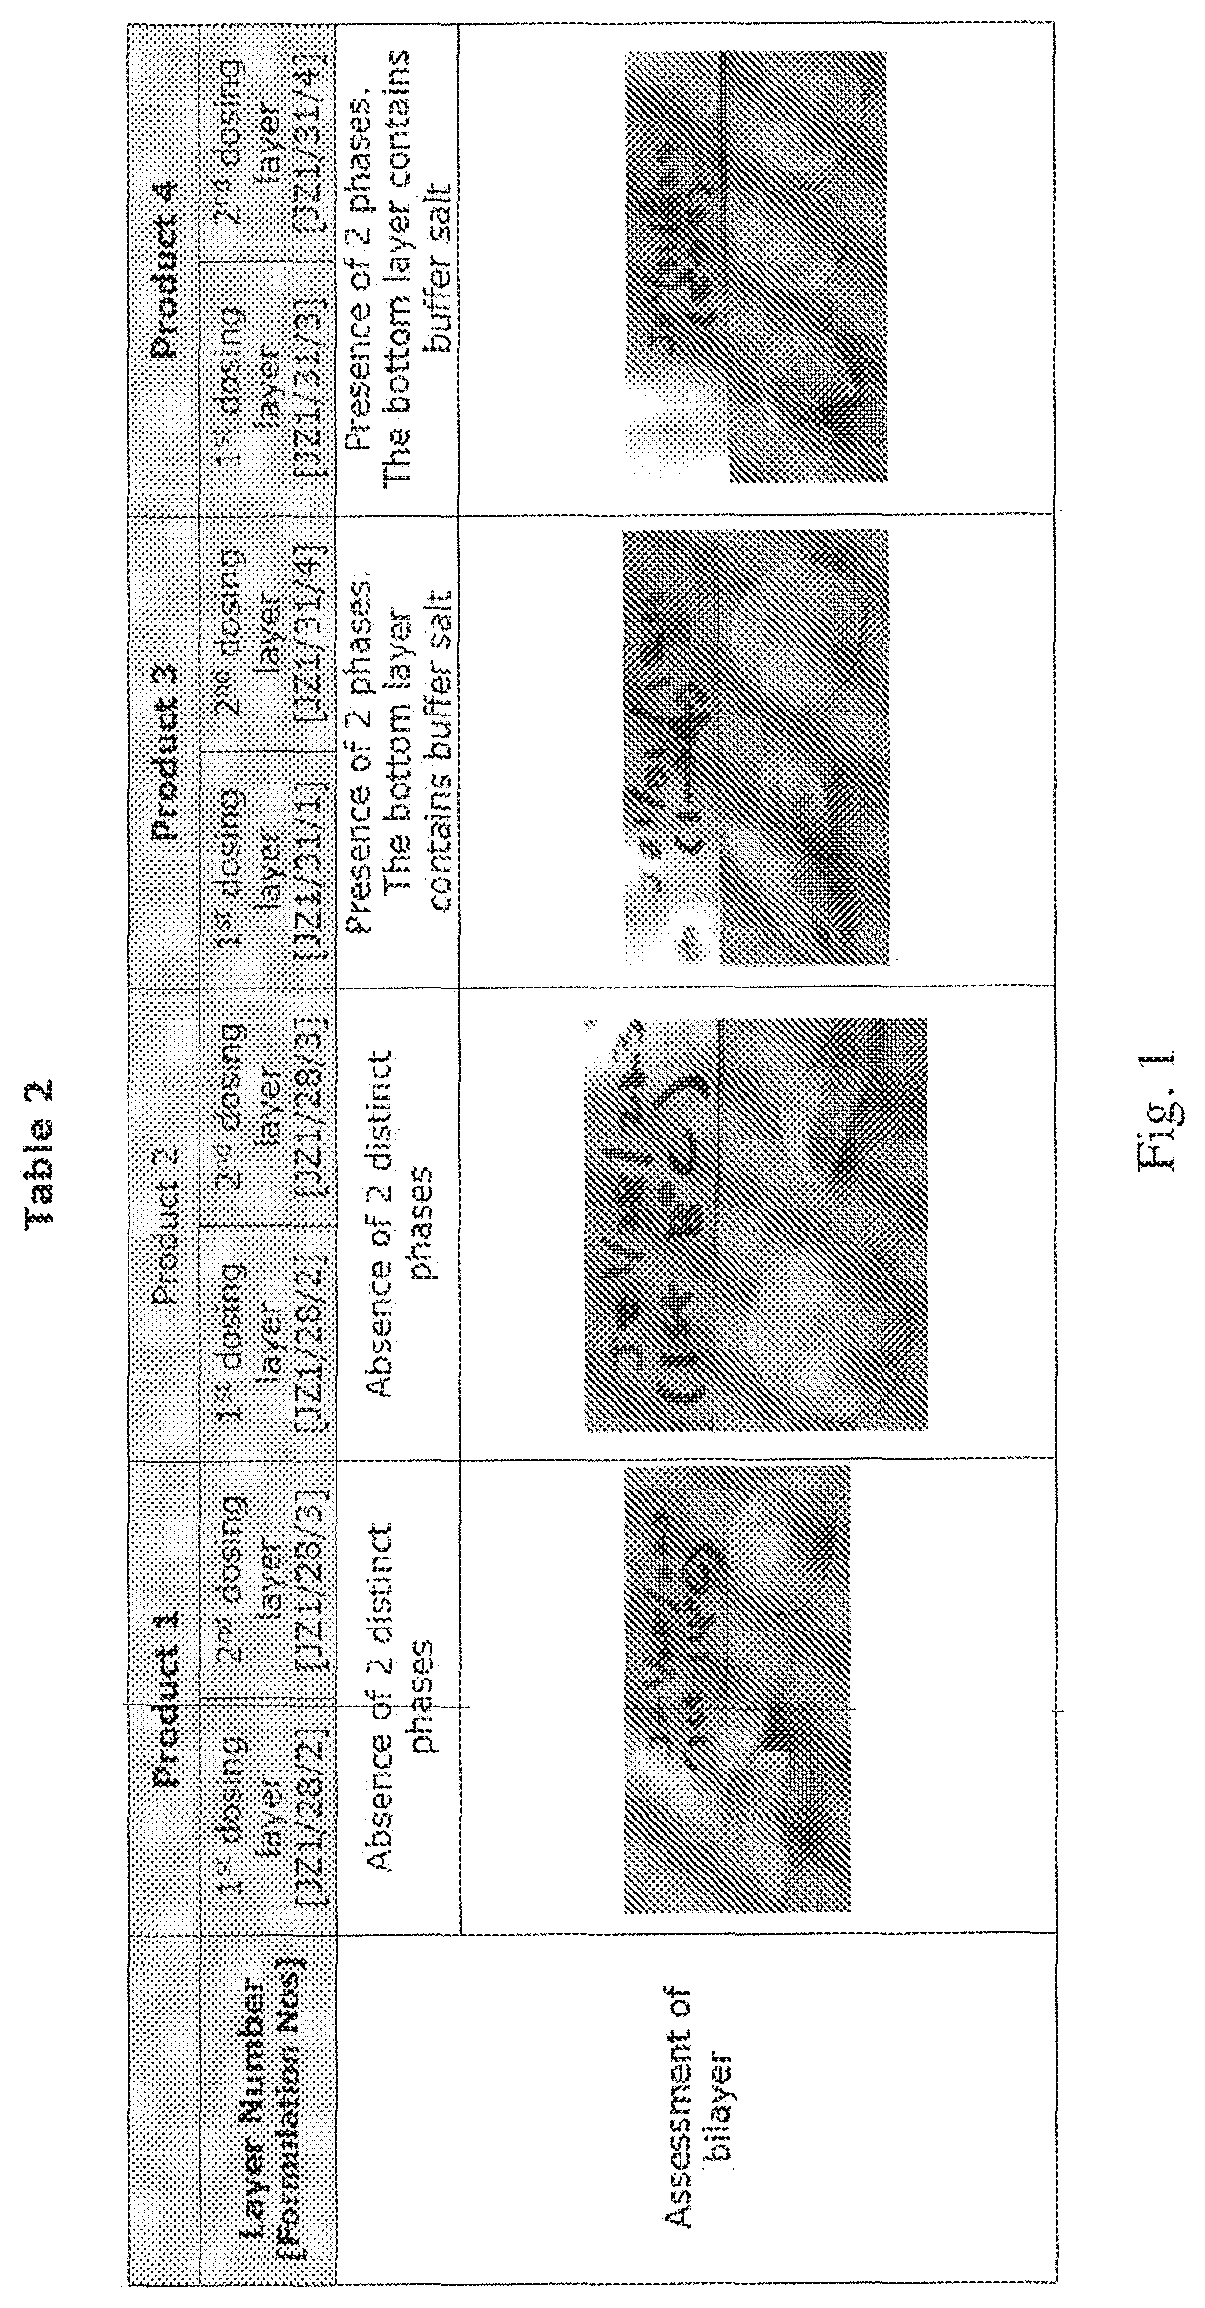 Compositions of different densities for fast disintegrating multi-layer tablet